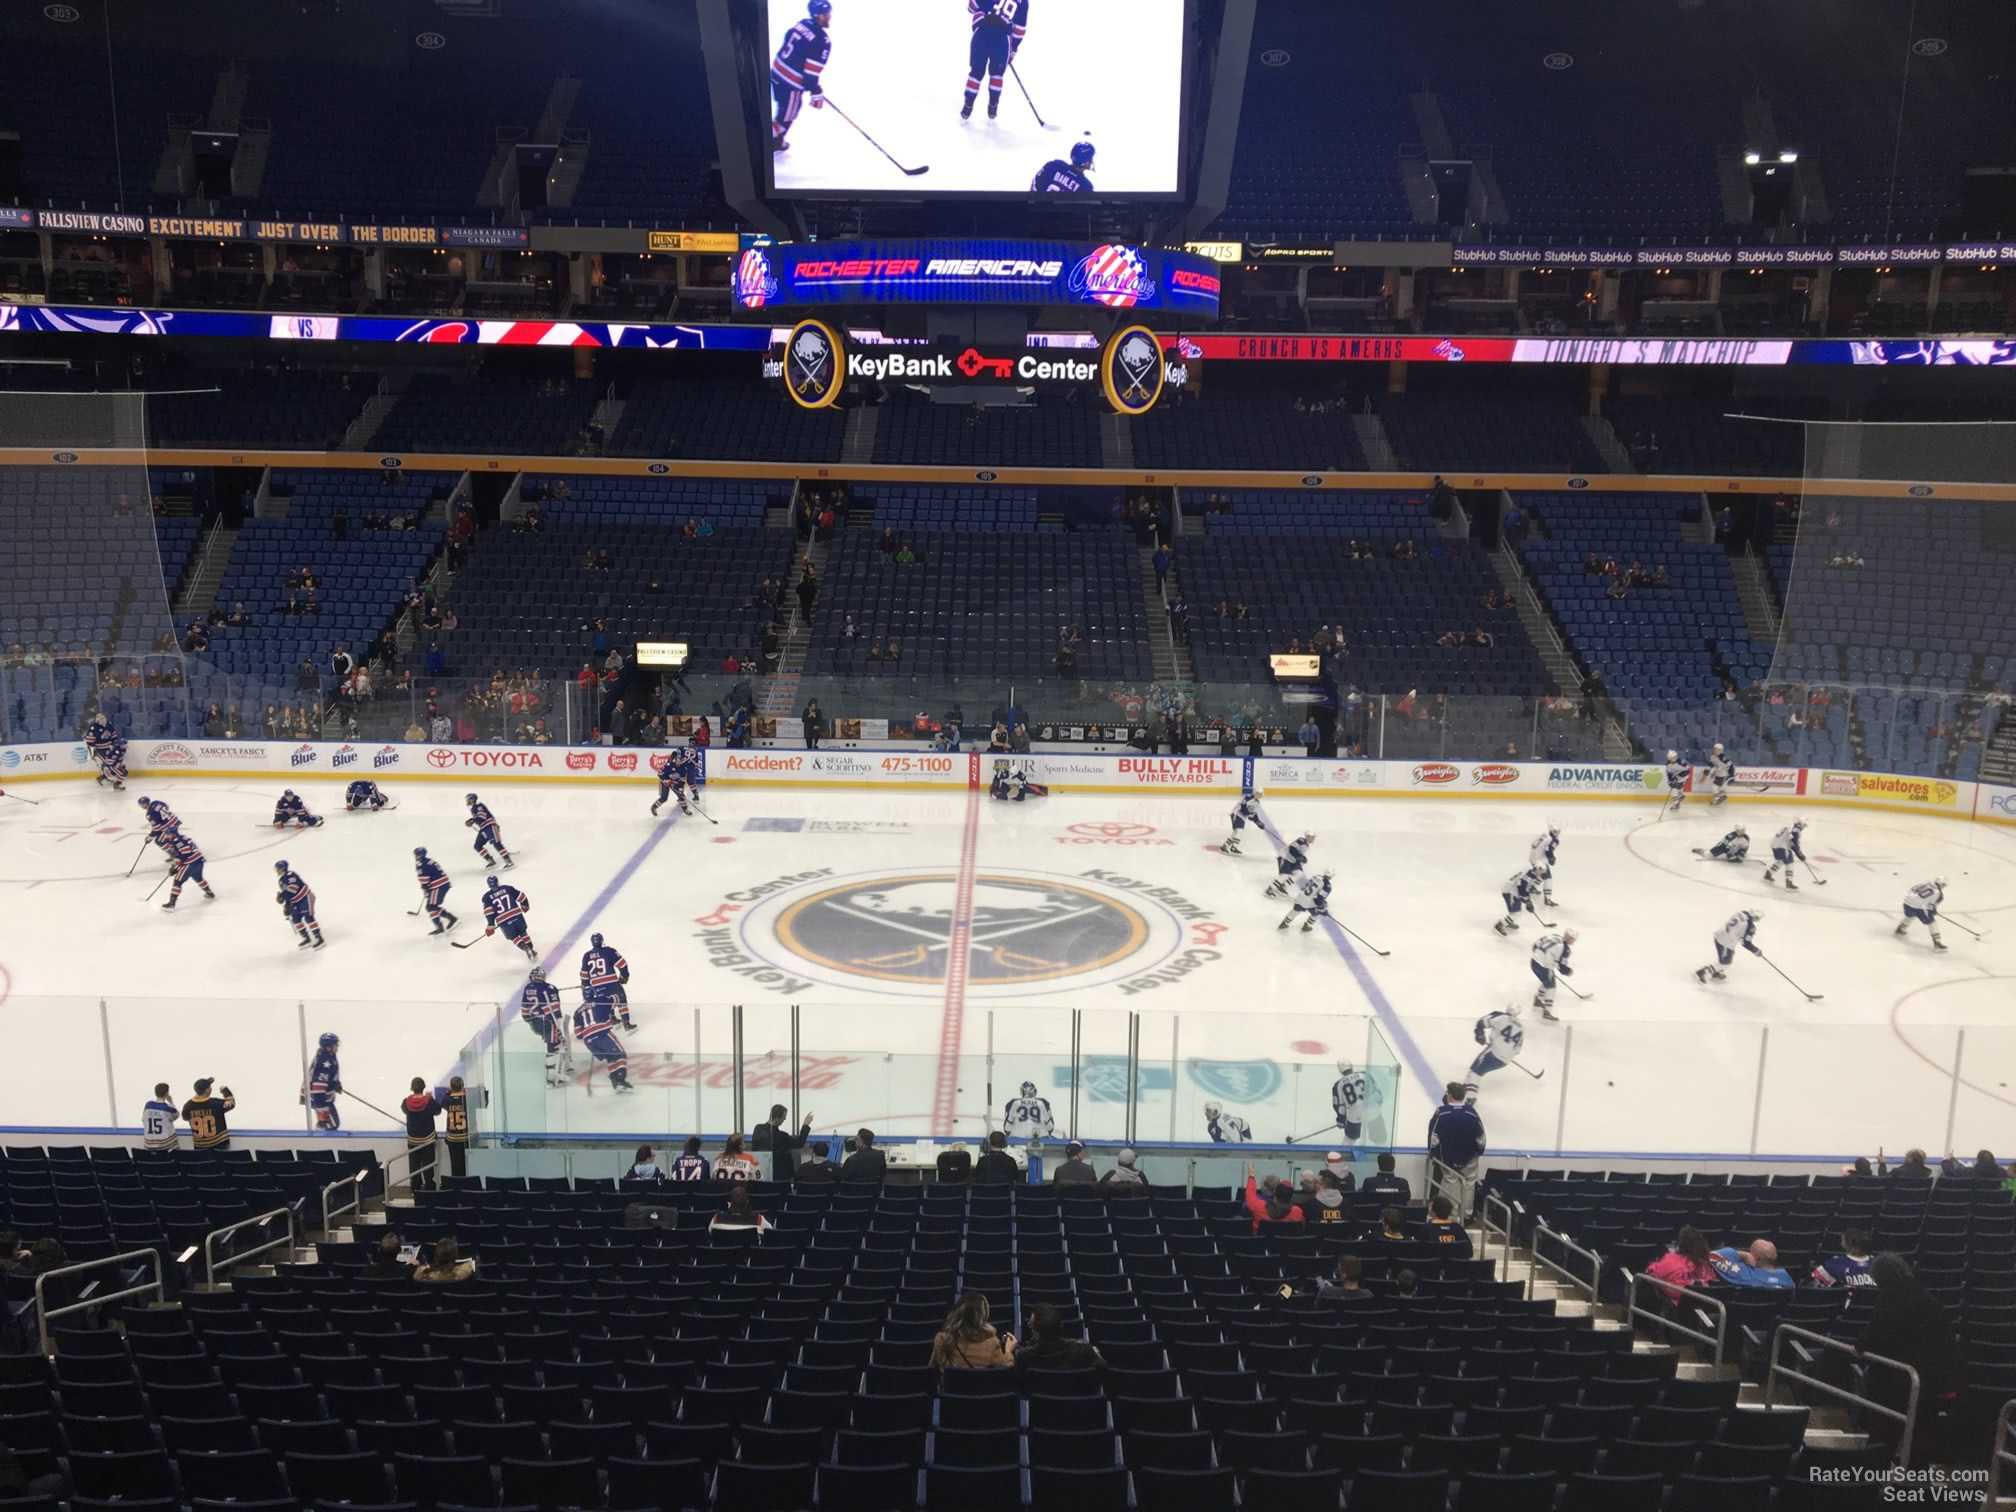 section 218, row 4 seat view  for hockey - keybank center